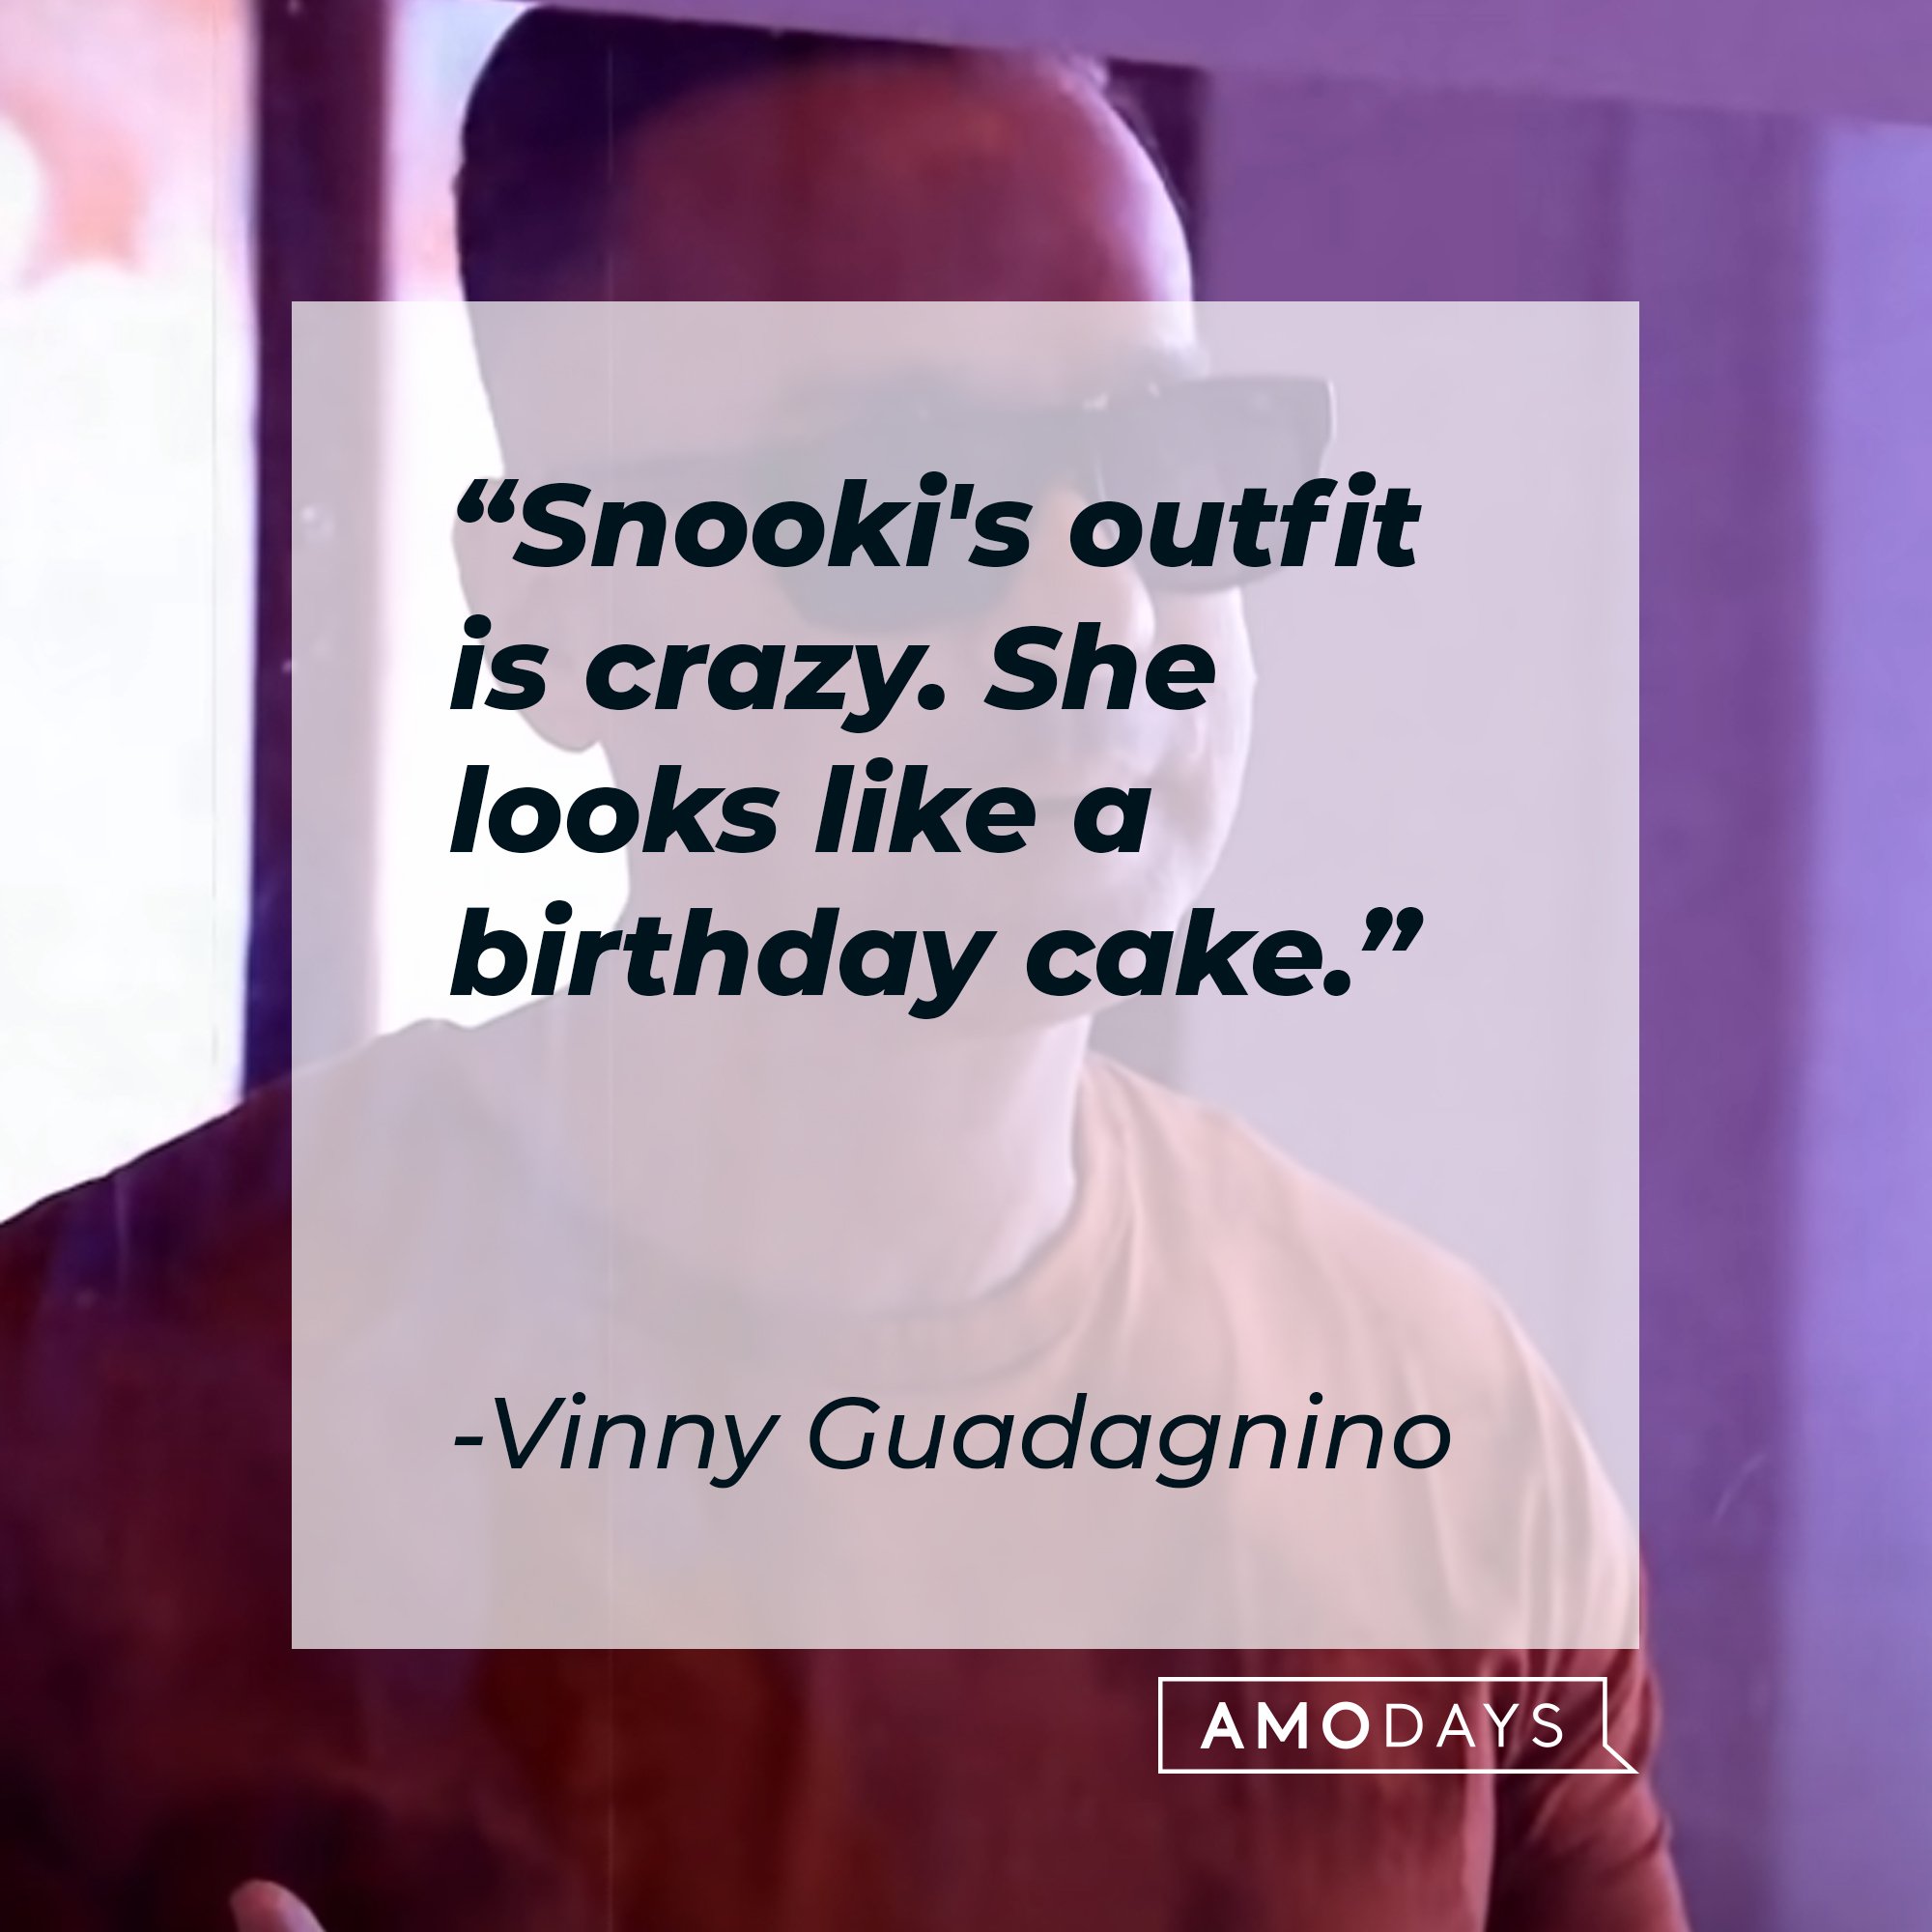 Vinny Guadagnino’s quote: "Snooki's outfit is crazy. She looks like a birthday cake." | Image: AmoDays